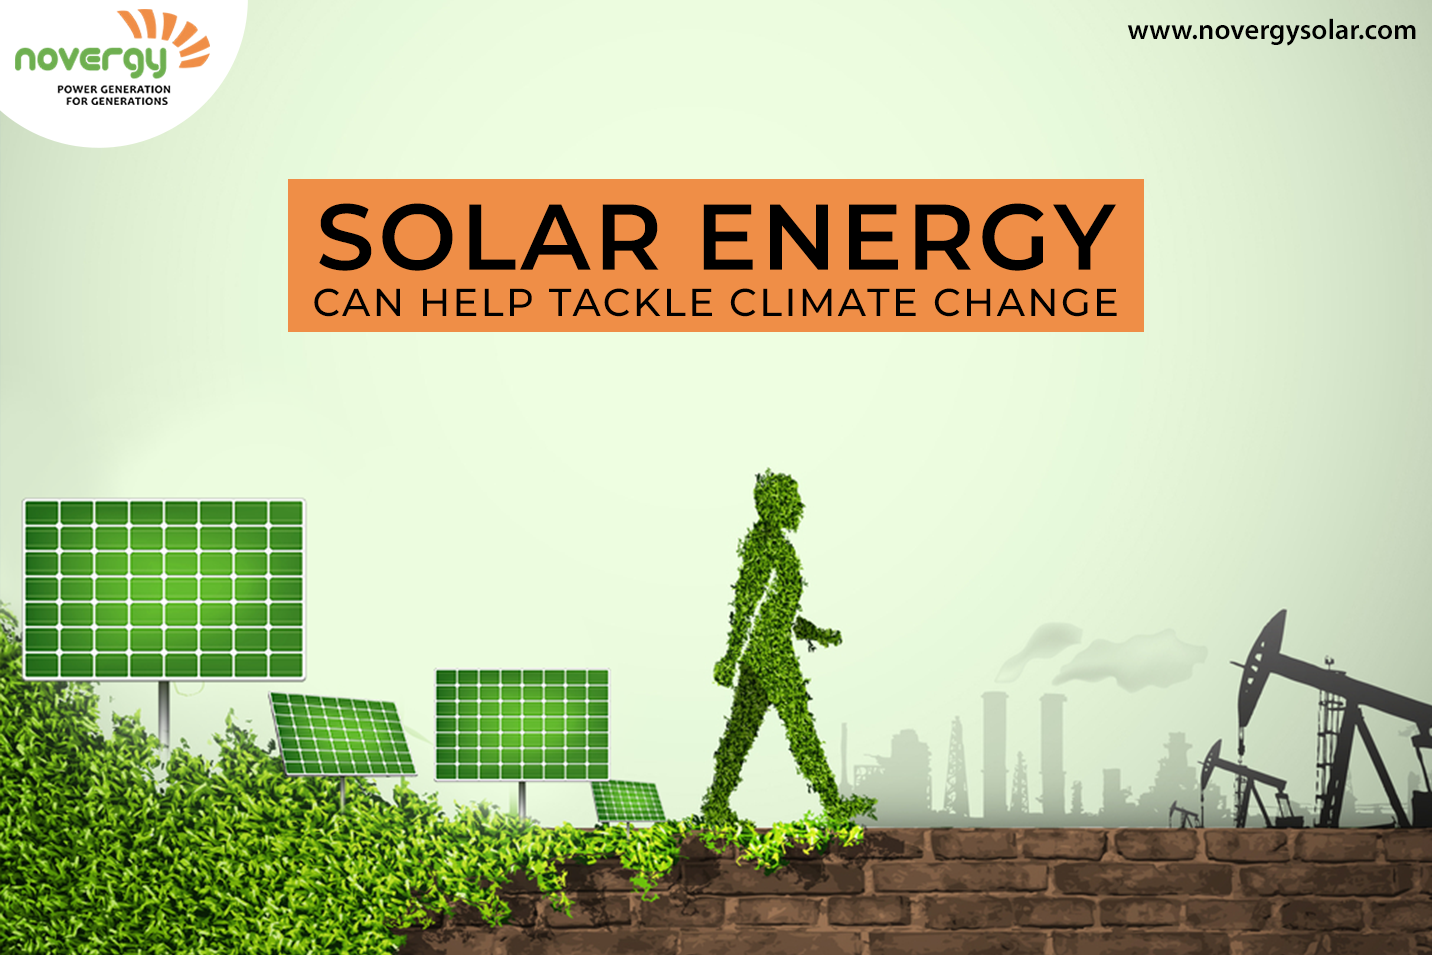 Solar energy can help tackle climate change